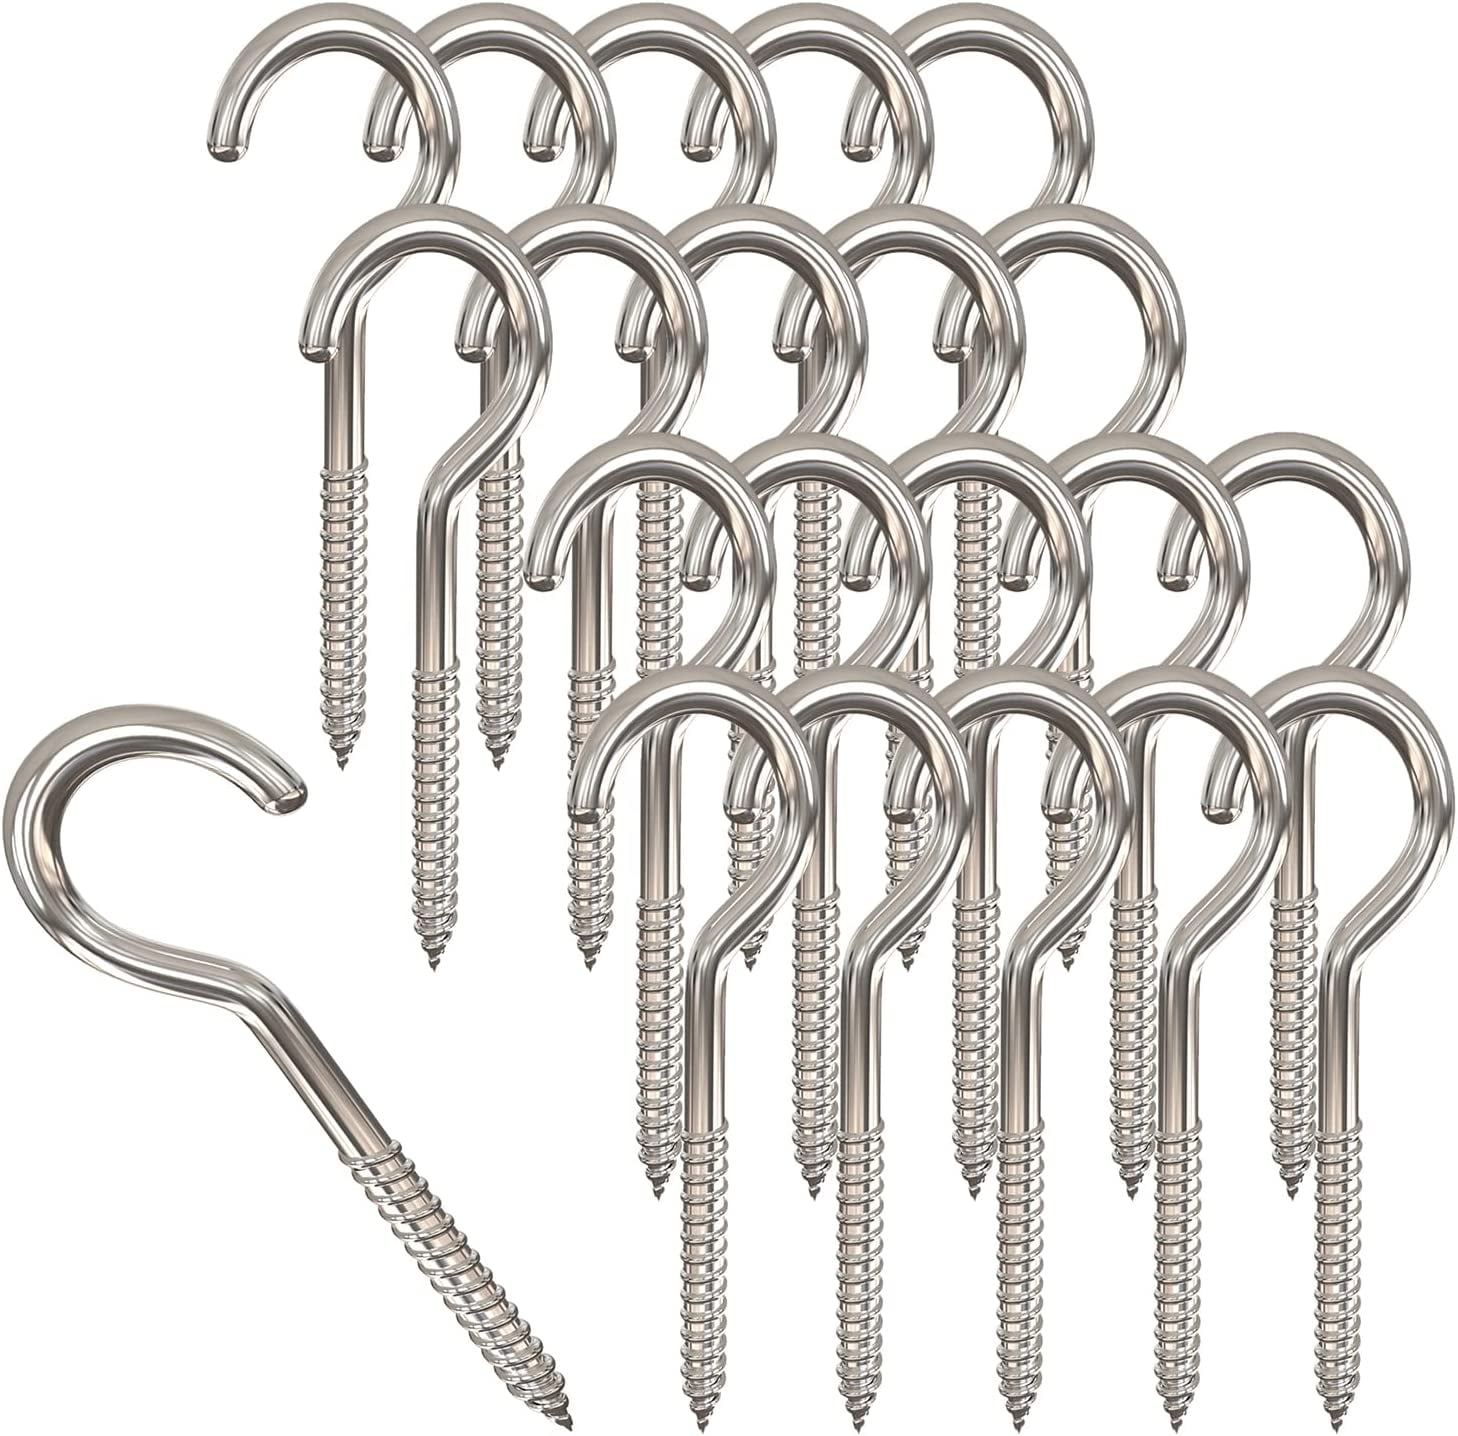 2 Inch Metal Cup Hook Round End Screw Hook Self Tapping Screw Hook Silver  50Pcs 